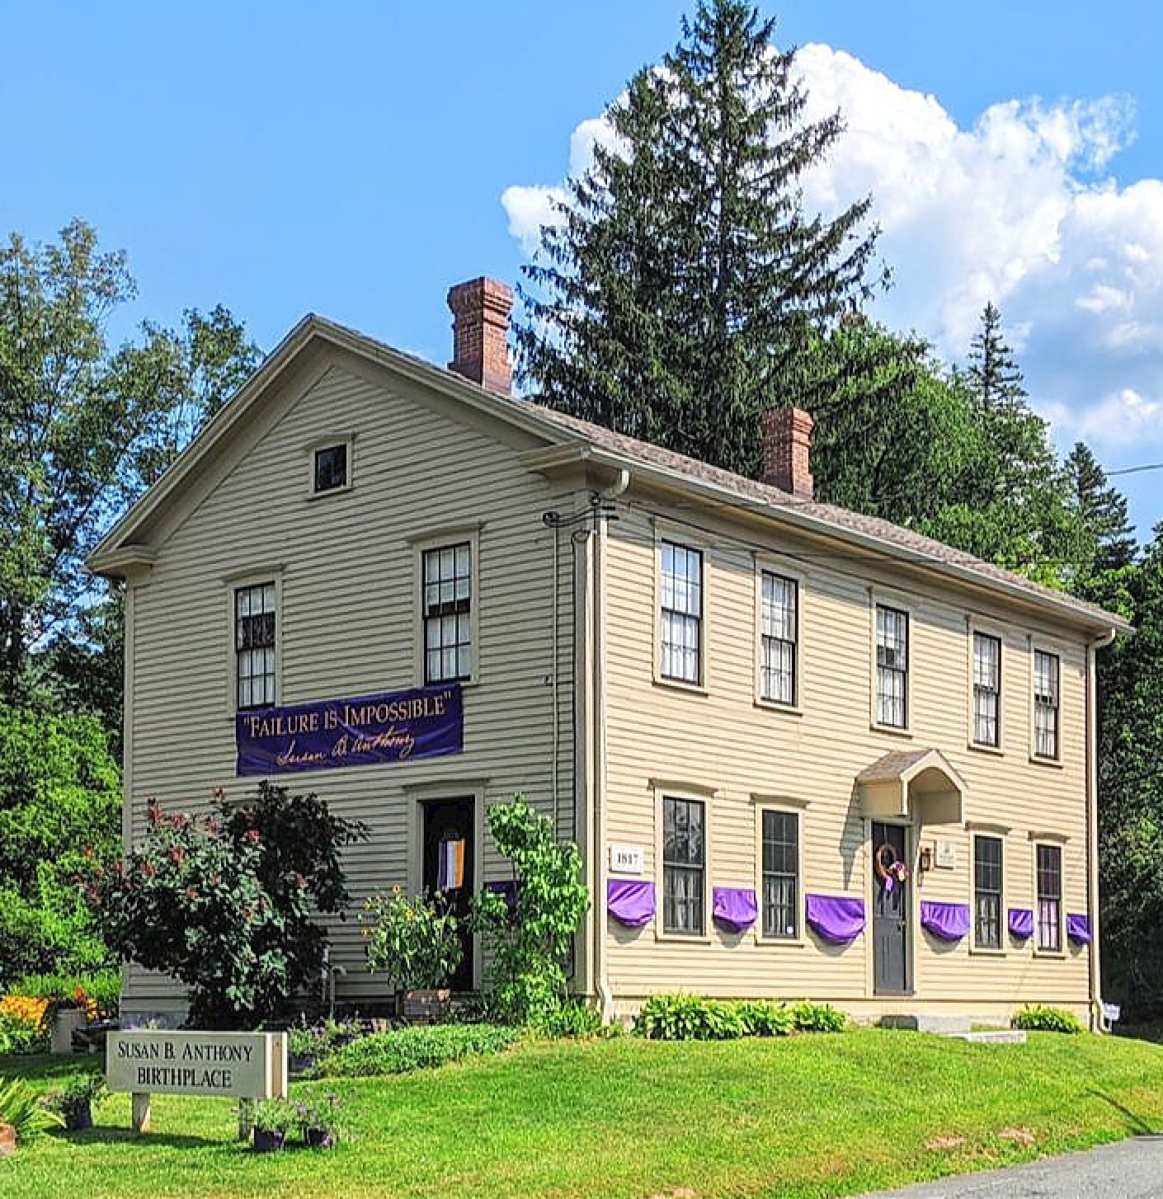 The Susan B. Anthony Birthplace Museum in Adams, Mass.